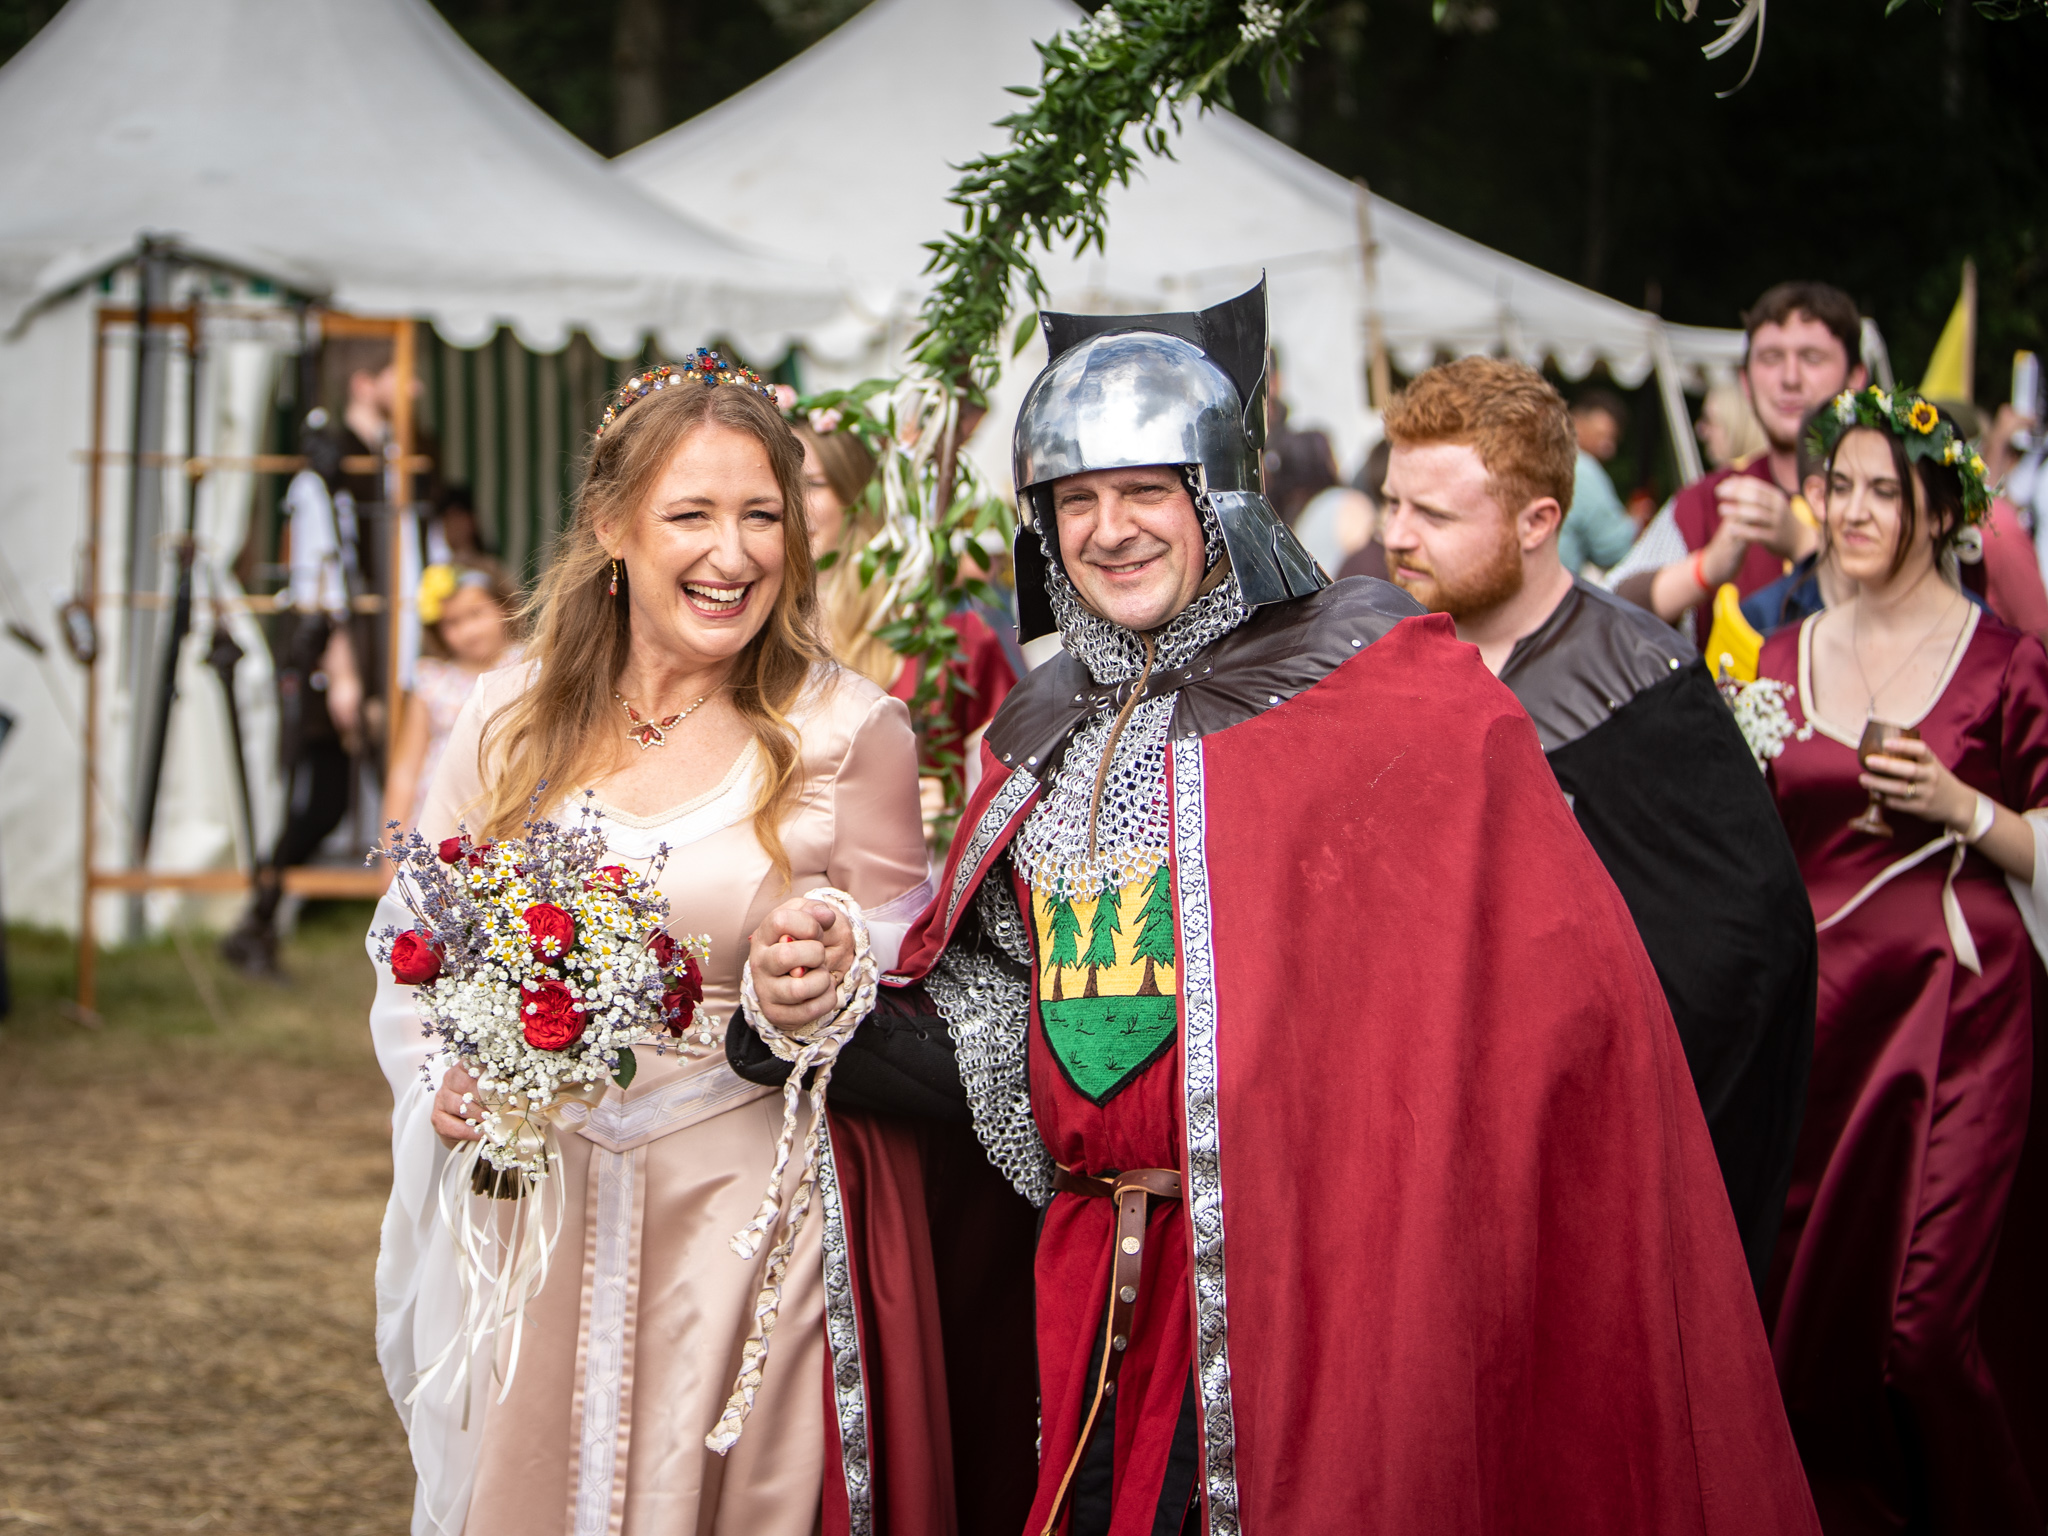 A newly-wed couple in arms stroll through the Kingdom of Loxwood